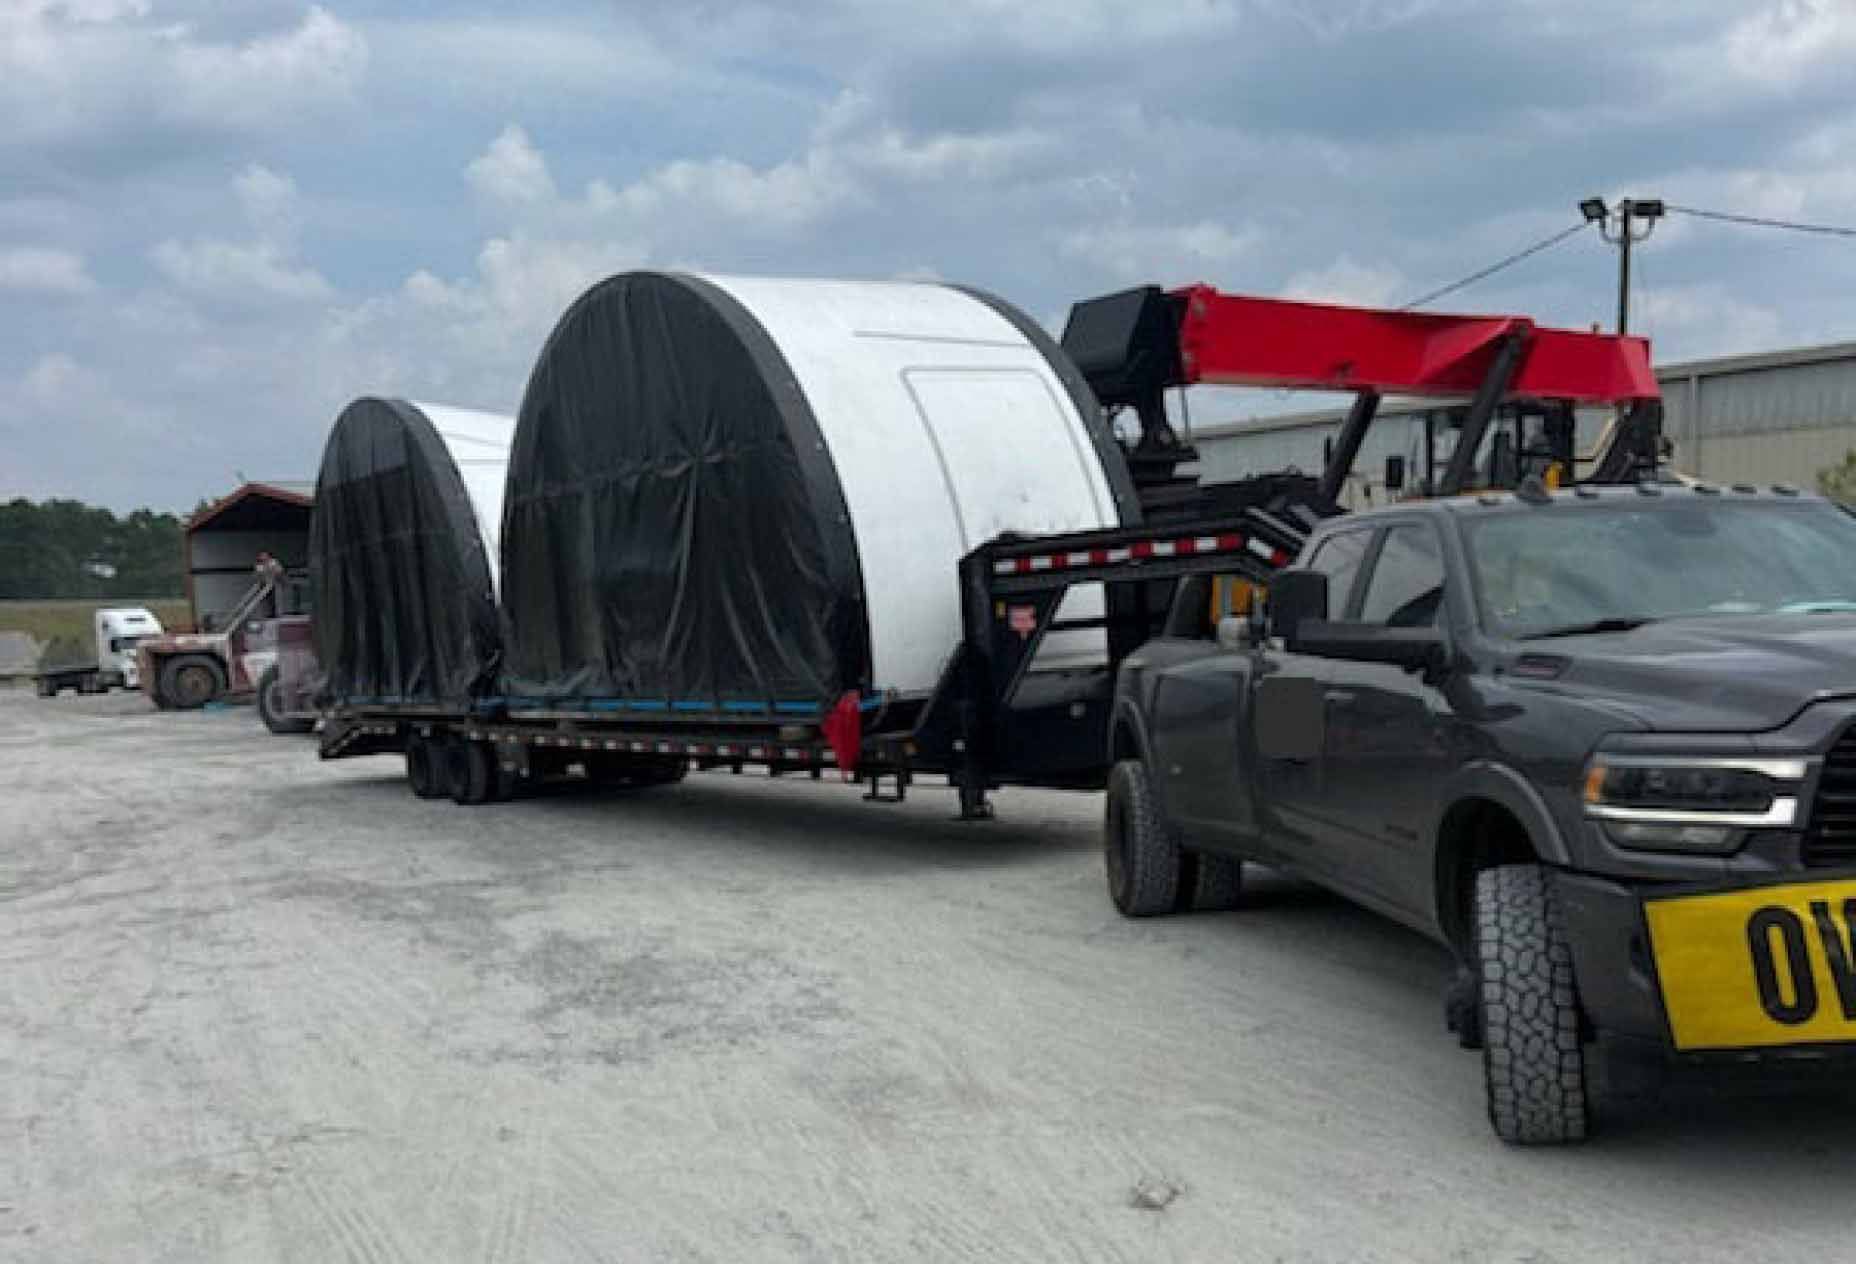 A low bed trailer attached to a pickup truck carrying two large metal half-circle containers covered in black tarp.